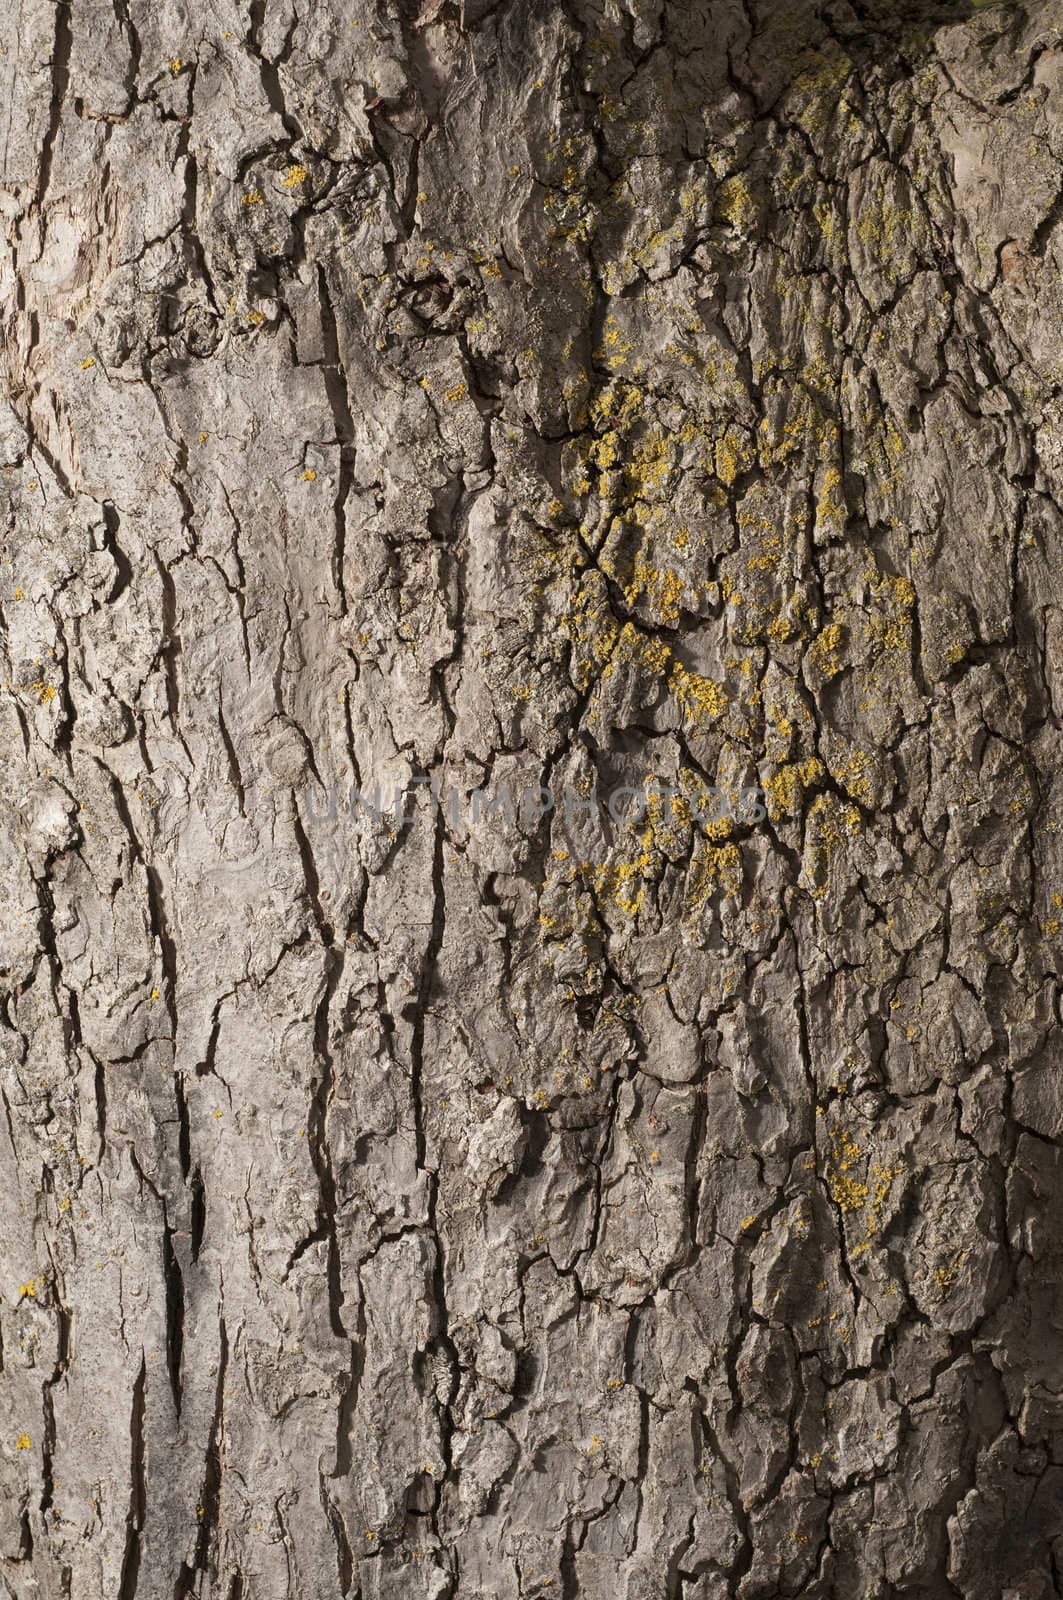 Apple tree bark great of a background